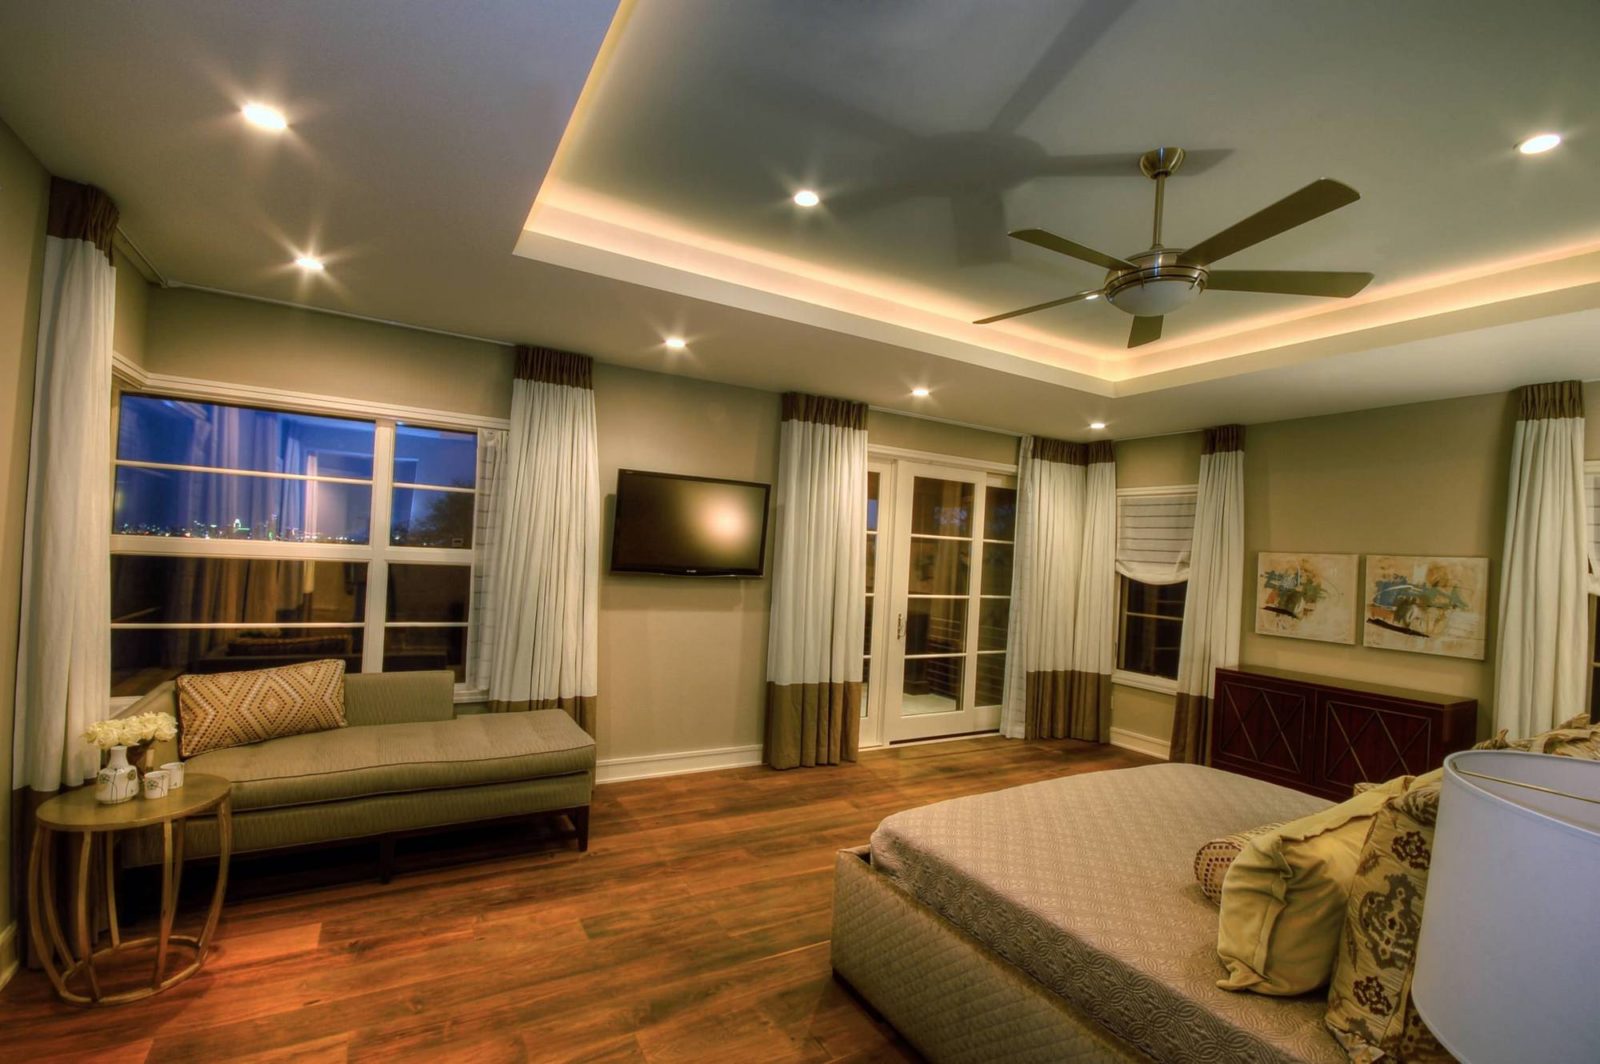 Indirect lighting around the tray ceiling